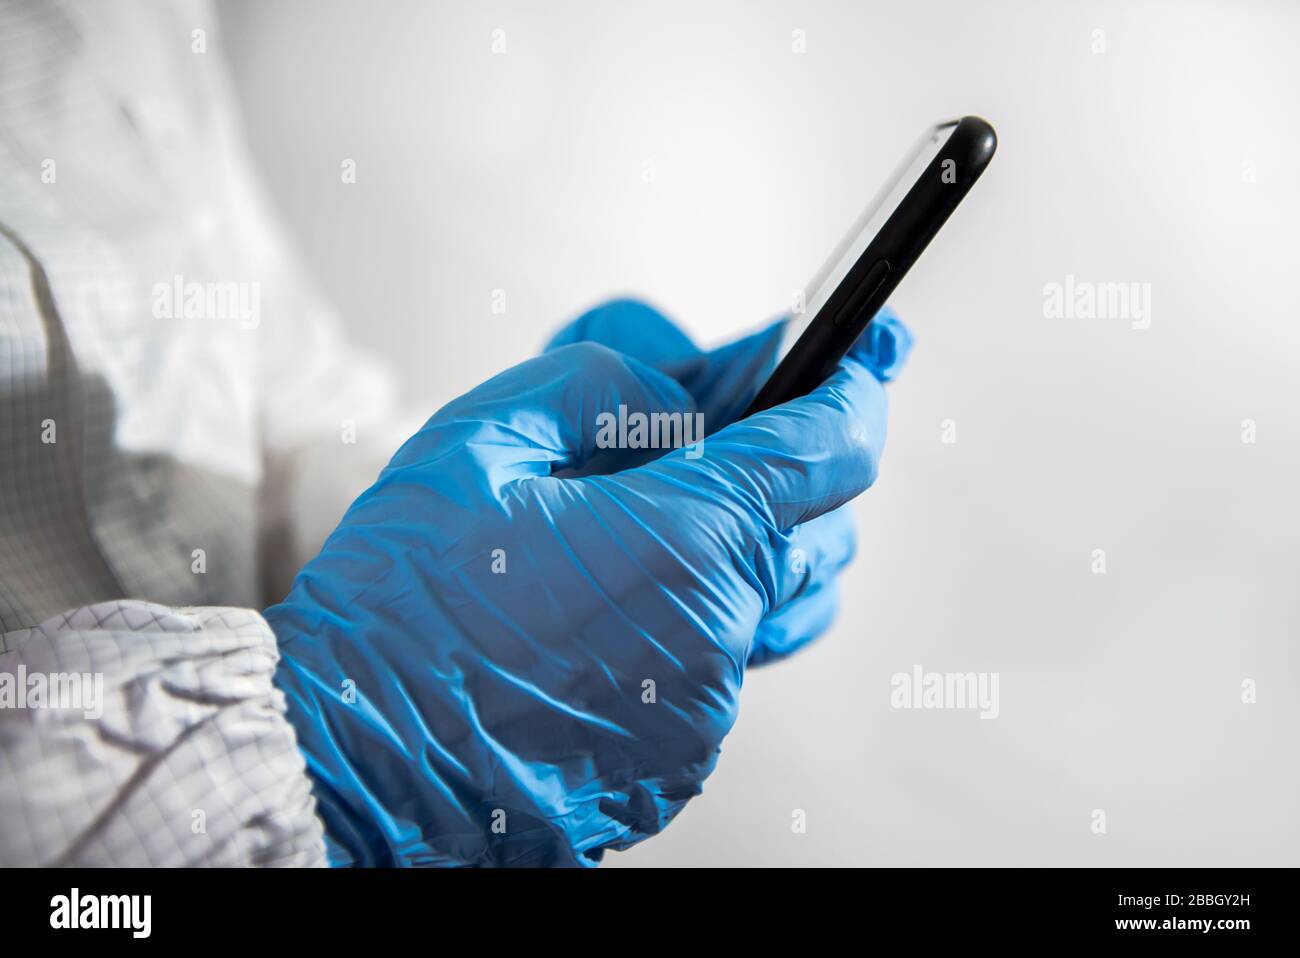 Scientist using smartphone in the scientific chemical laboratory. Doctor hands with blue gloves using phone device. Coronavirus has caused emergency s Stock Photo